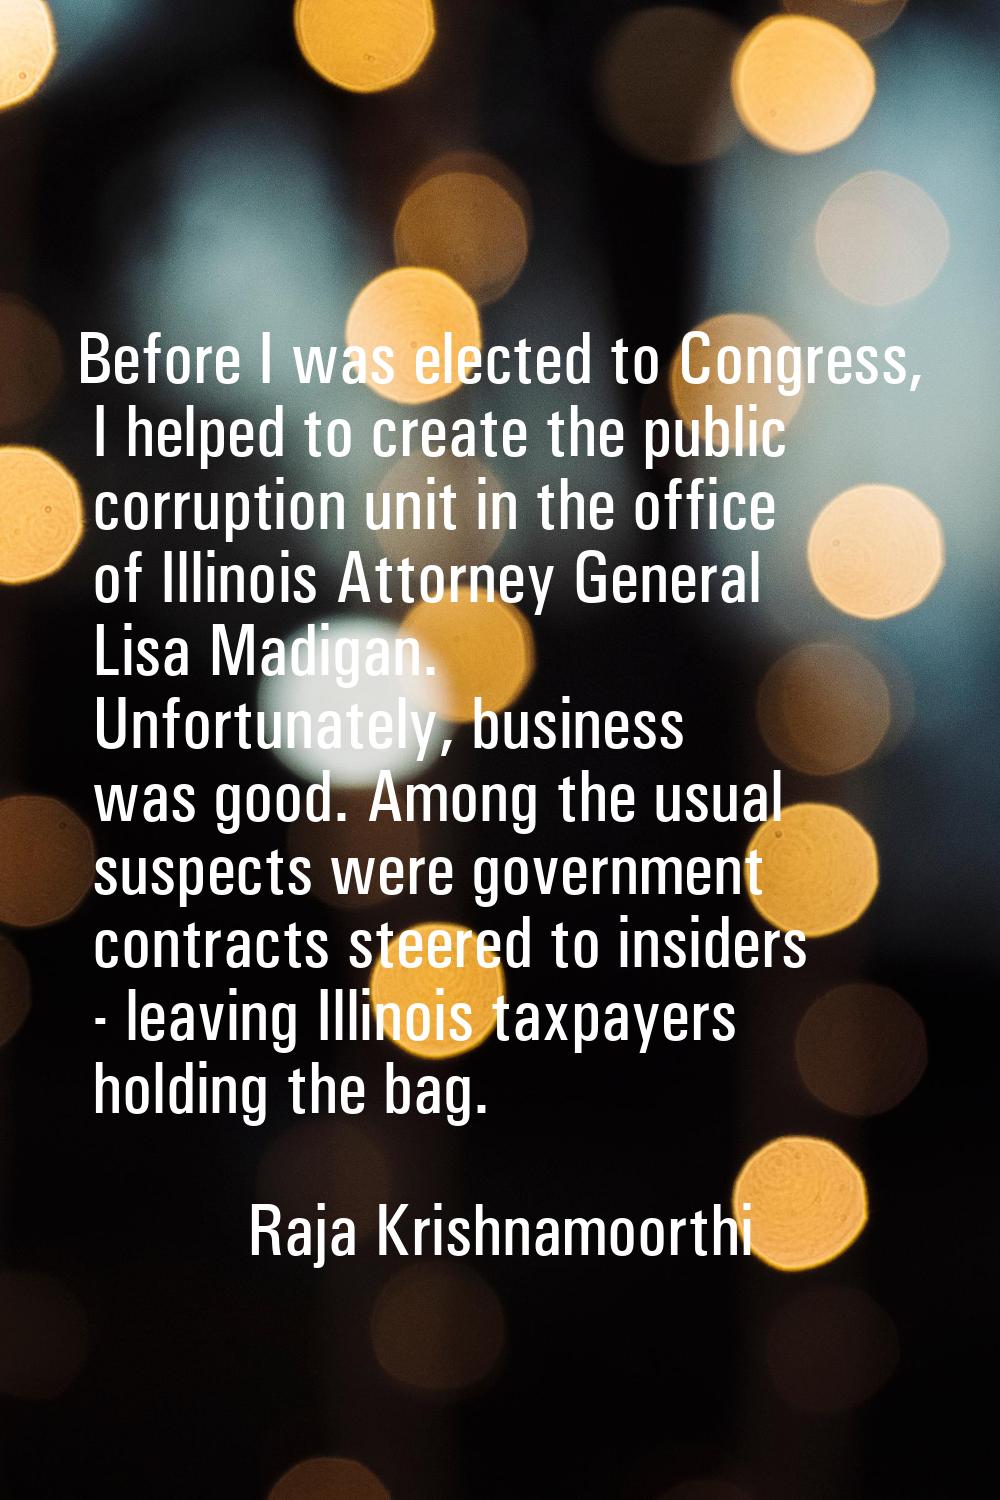 Before I was elected to Congress, I helped to create the public corruption unit in the office of Il